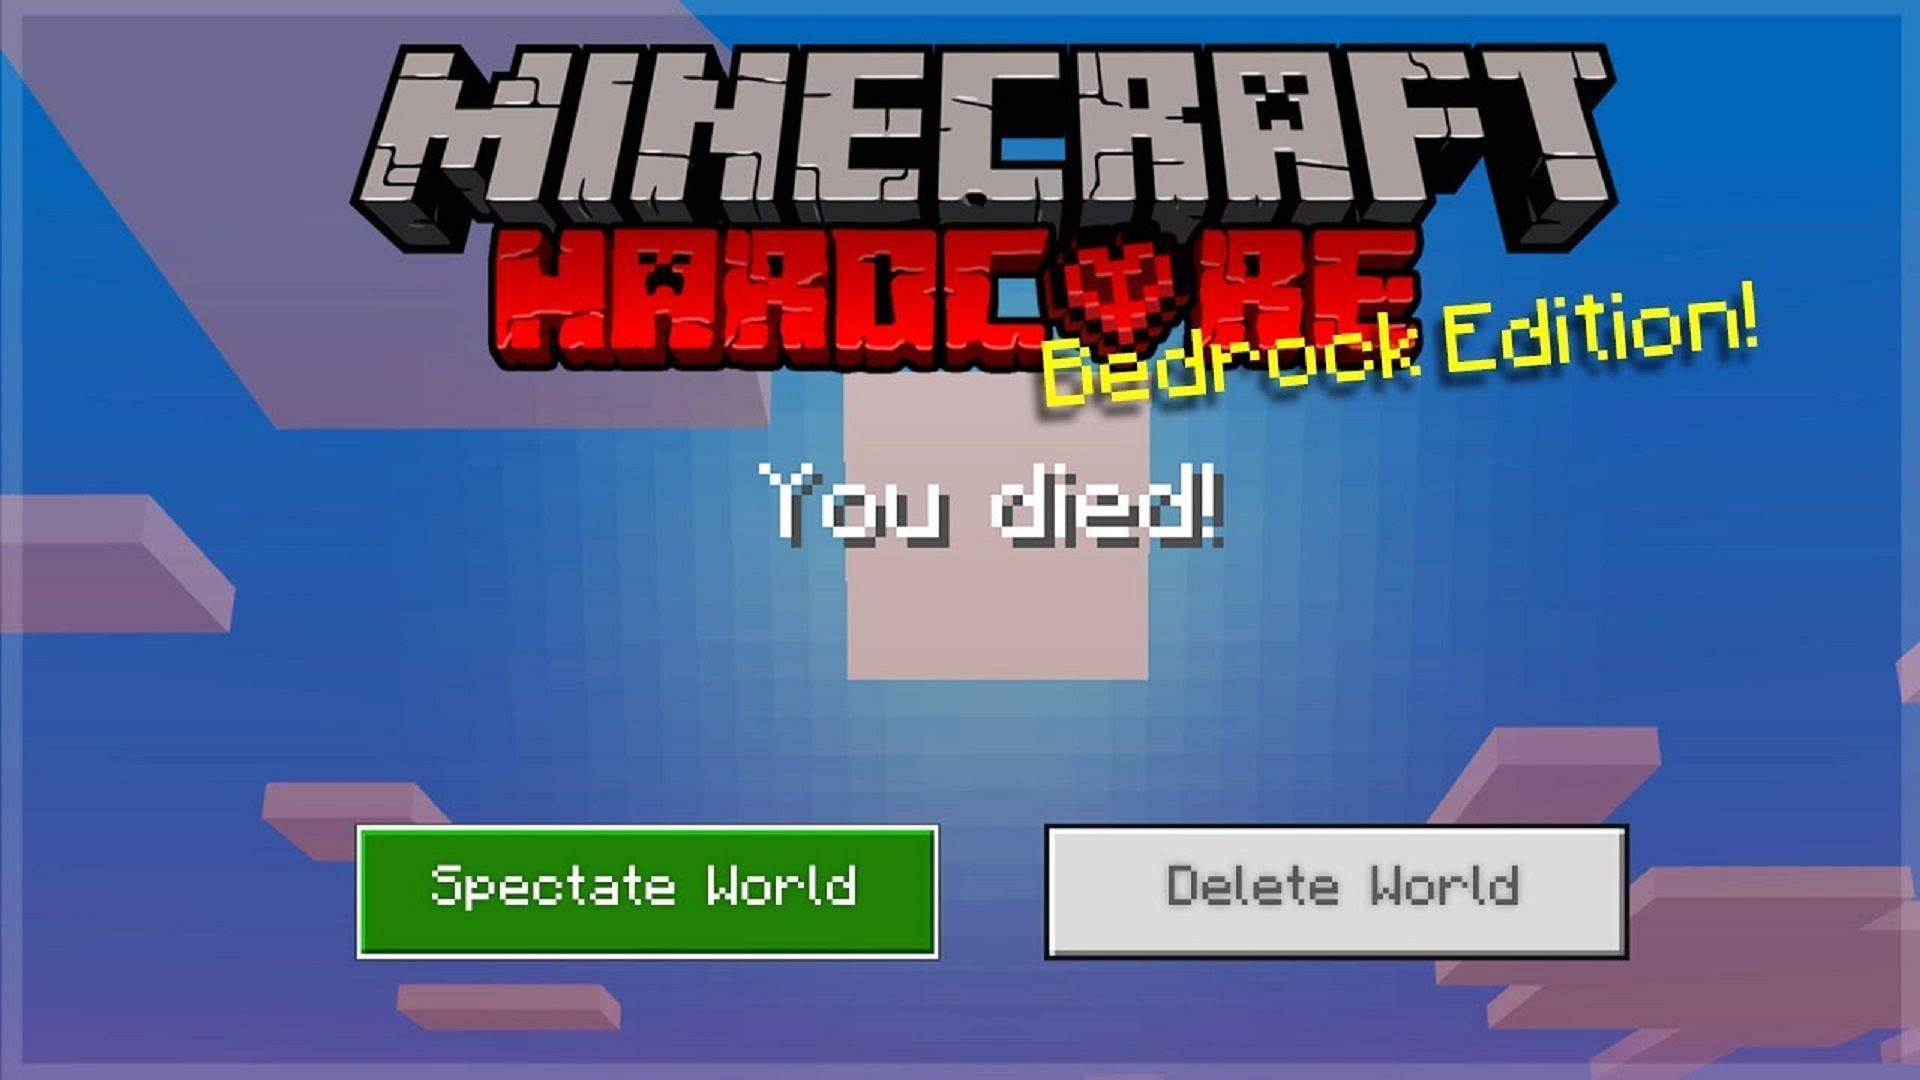 Hardcore Mode has remained elusive in Bedrock Edition (Image via ECKOSOLDIER/YouTube)